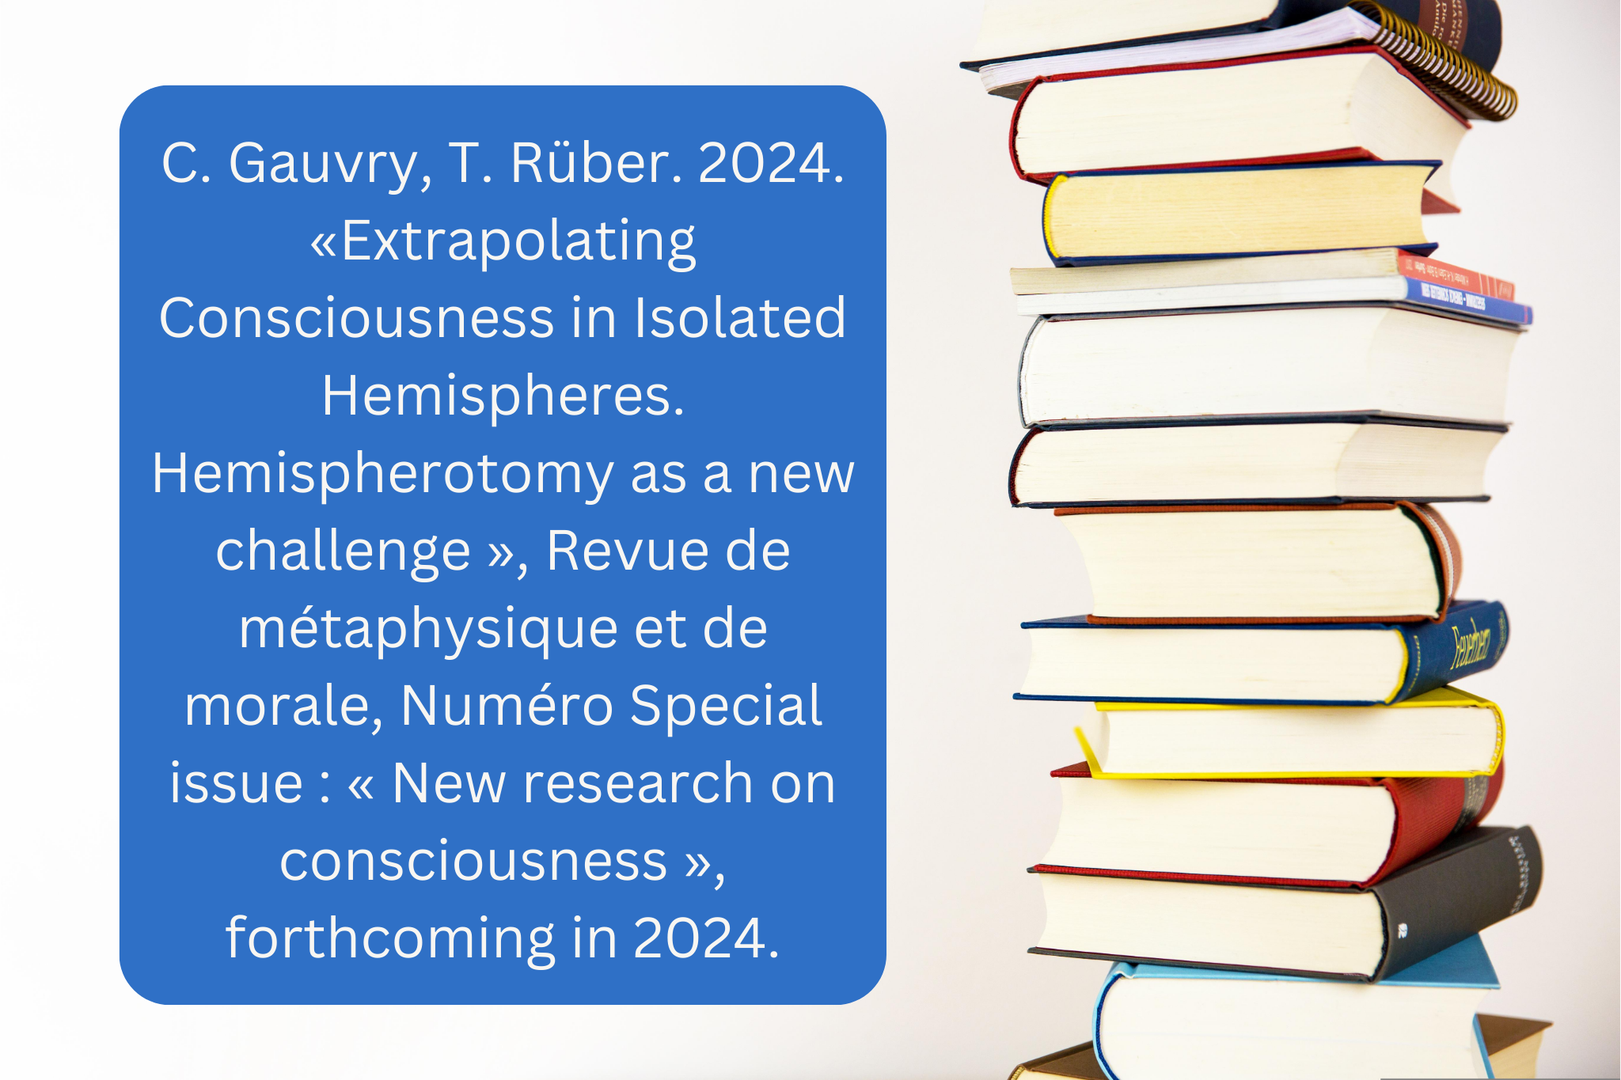 C. Gauvry, T. Rüber. 2024. « Extrapolating Consciousness in Isolated Hemispheres. Hemispherotomy as a new challenge », Revue de métaphysique et de morale, Numéro Special issue  « New research on consciousness », forthcoming in 2024.